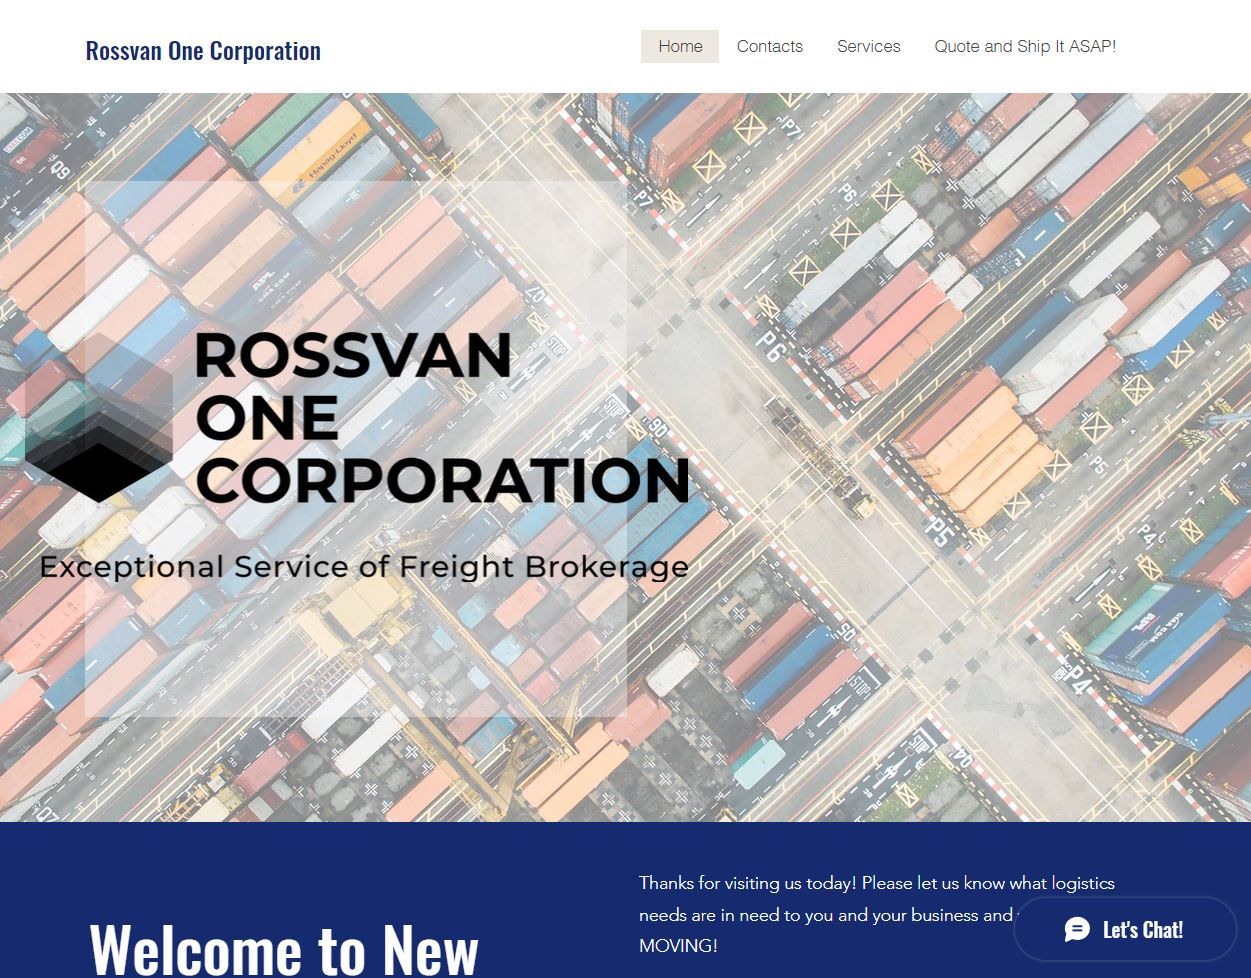 The Rossvan One Corporation is a freight company based in the United States. 